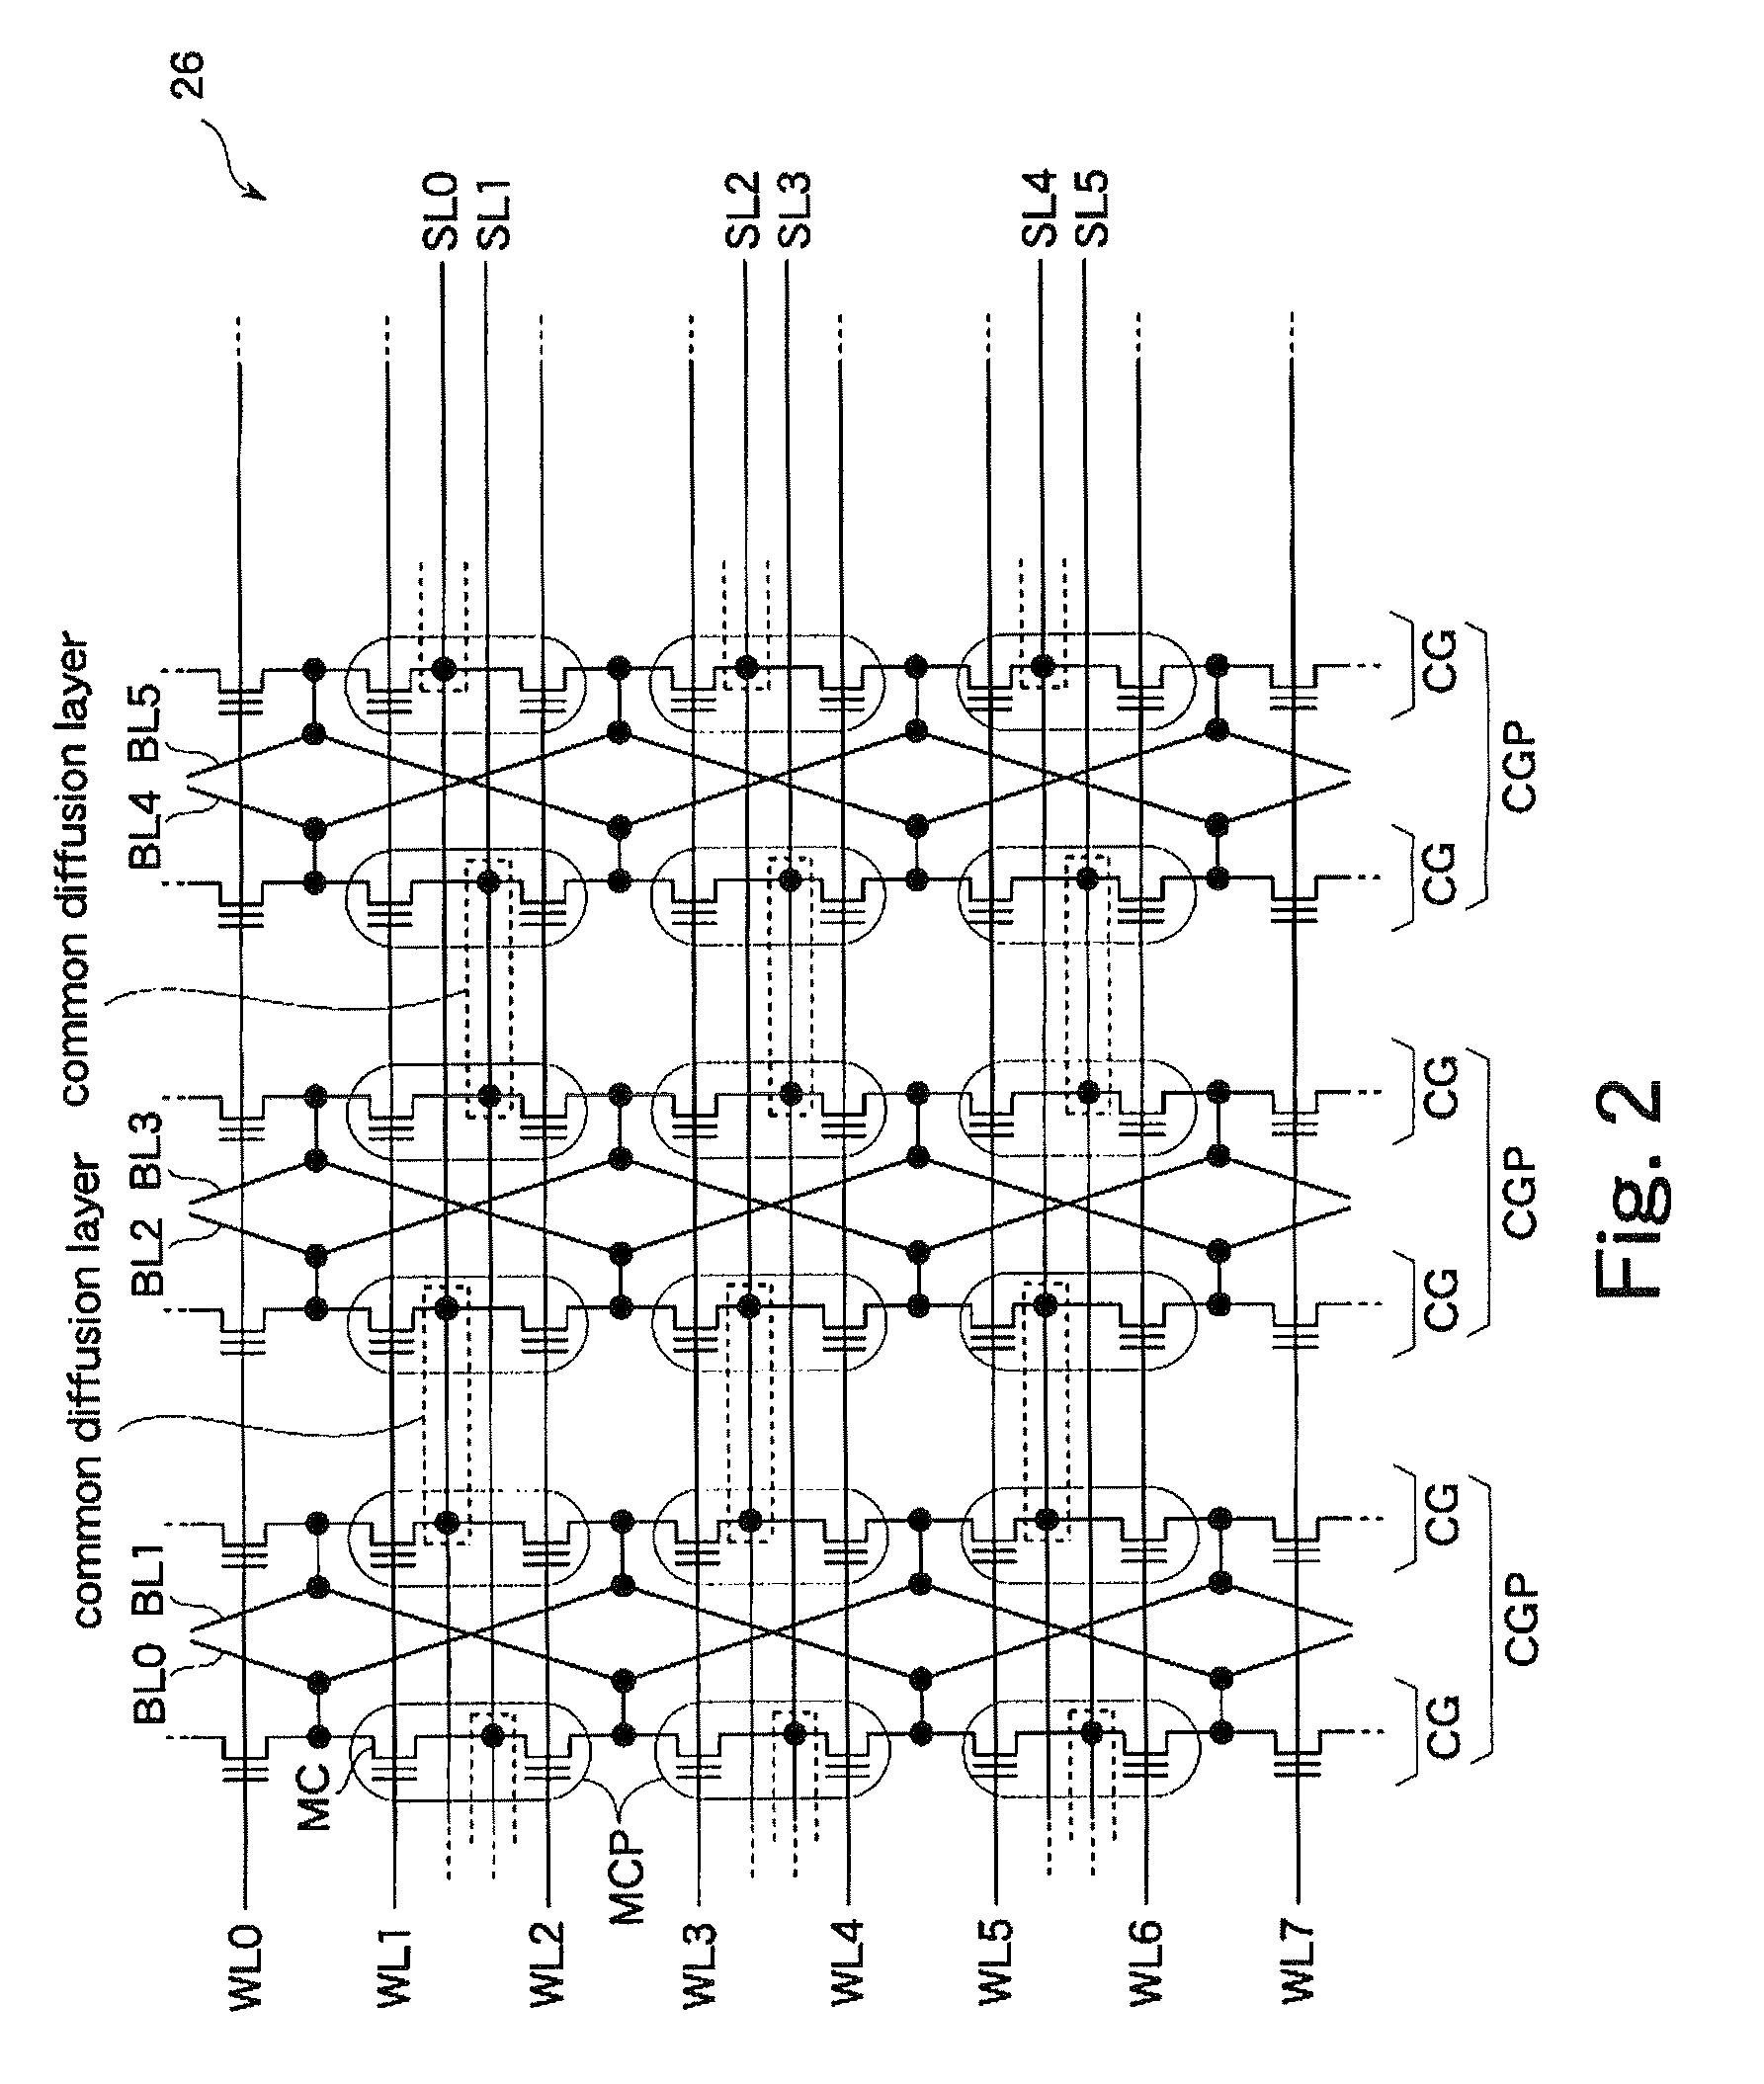 Nonvolatile memory cell array architecture for high speed reading